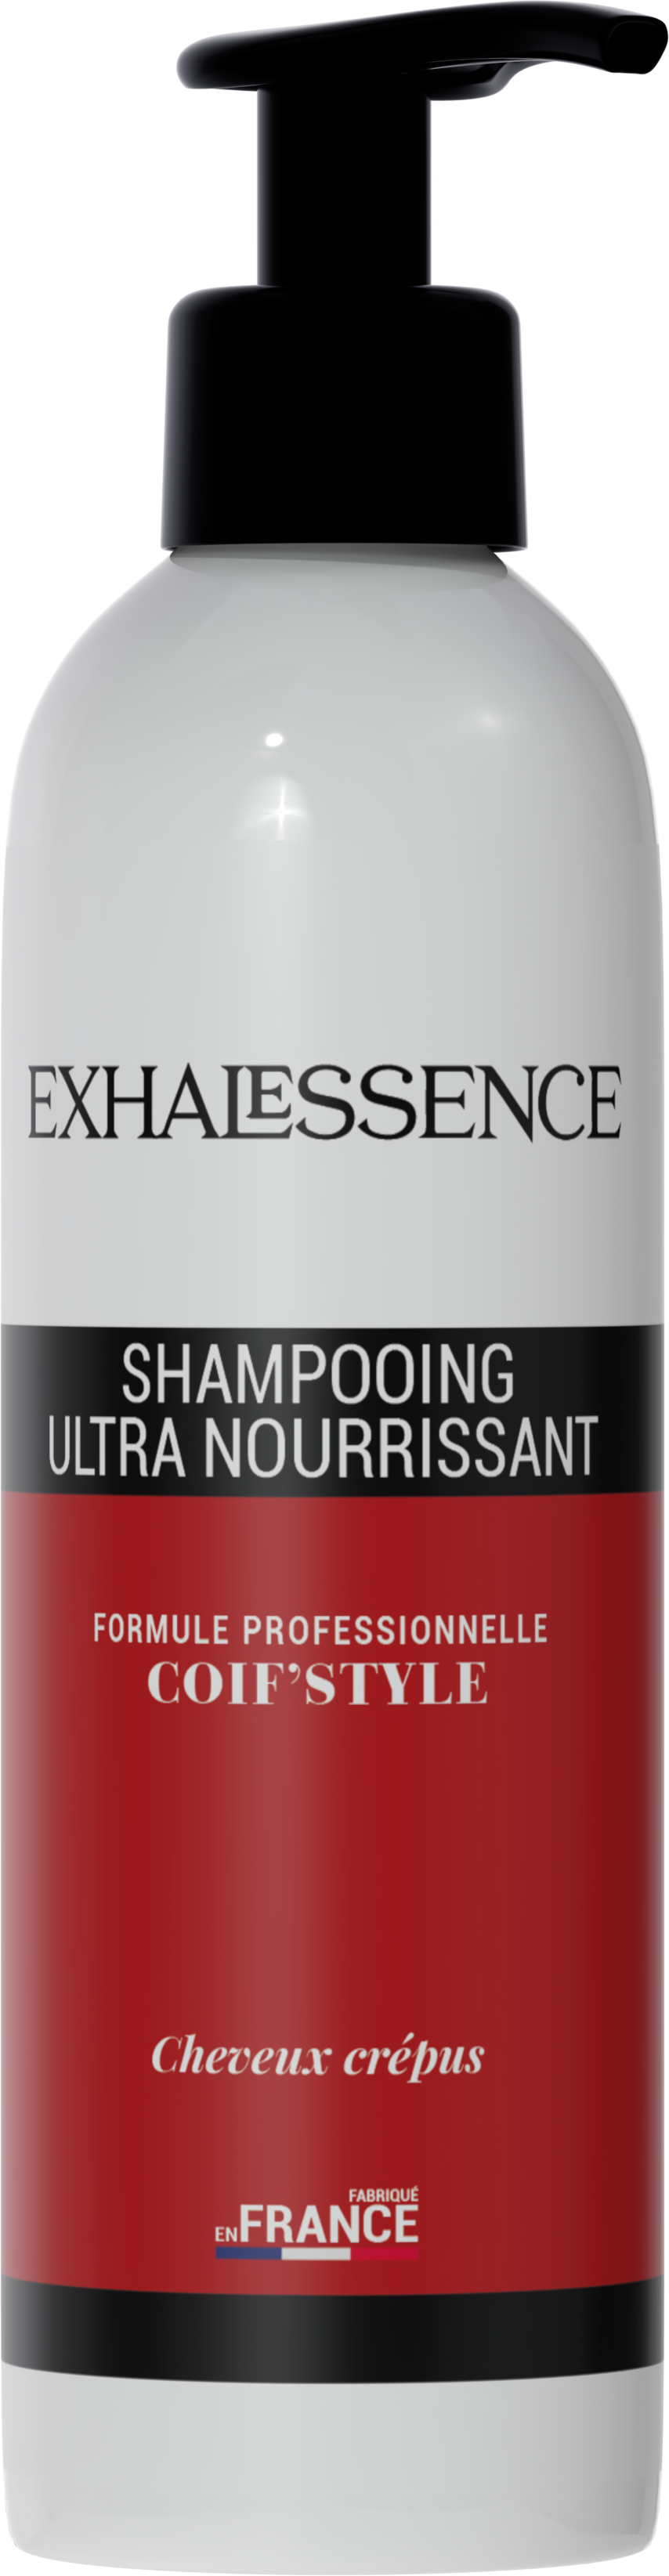 SHAMPOOING ULTRA NOURRISSANT.png